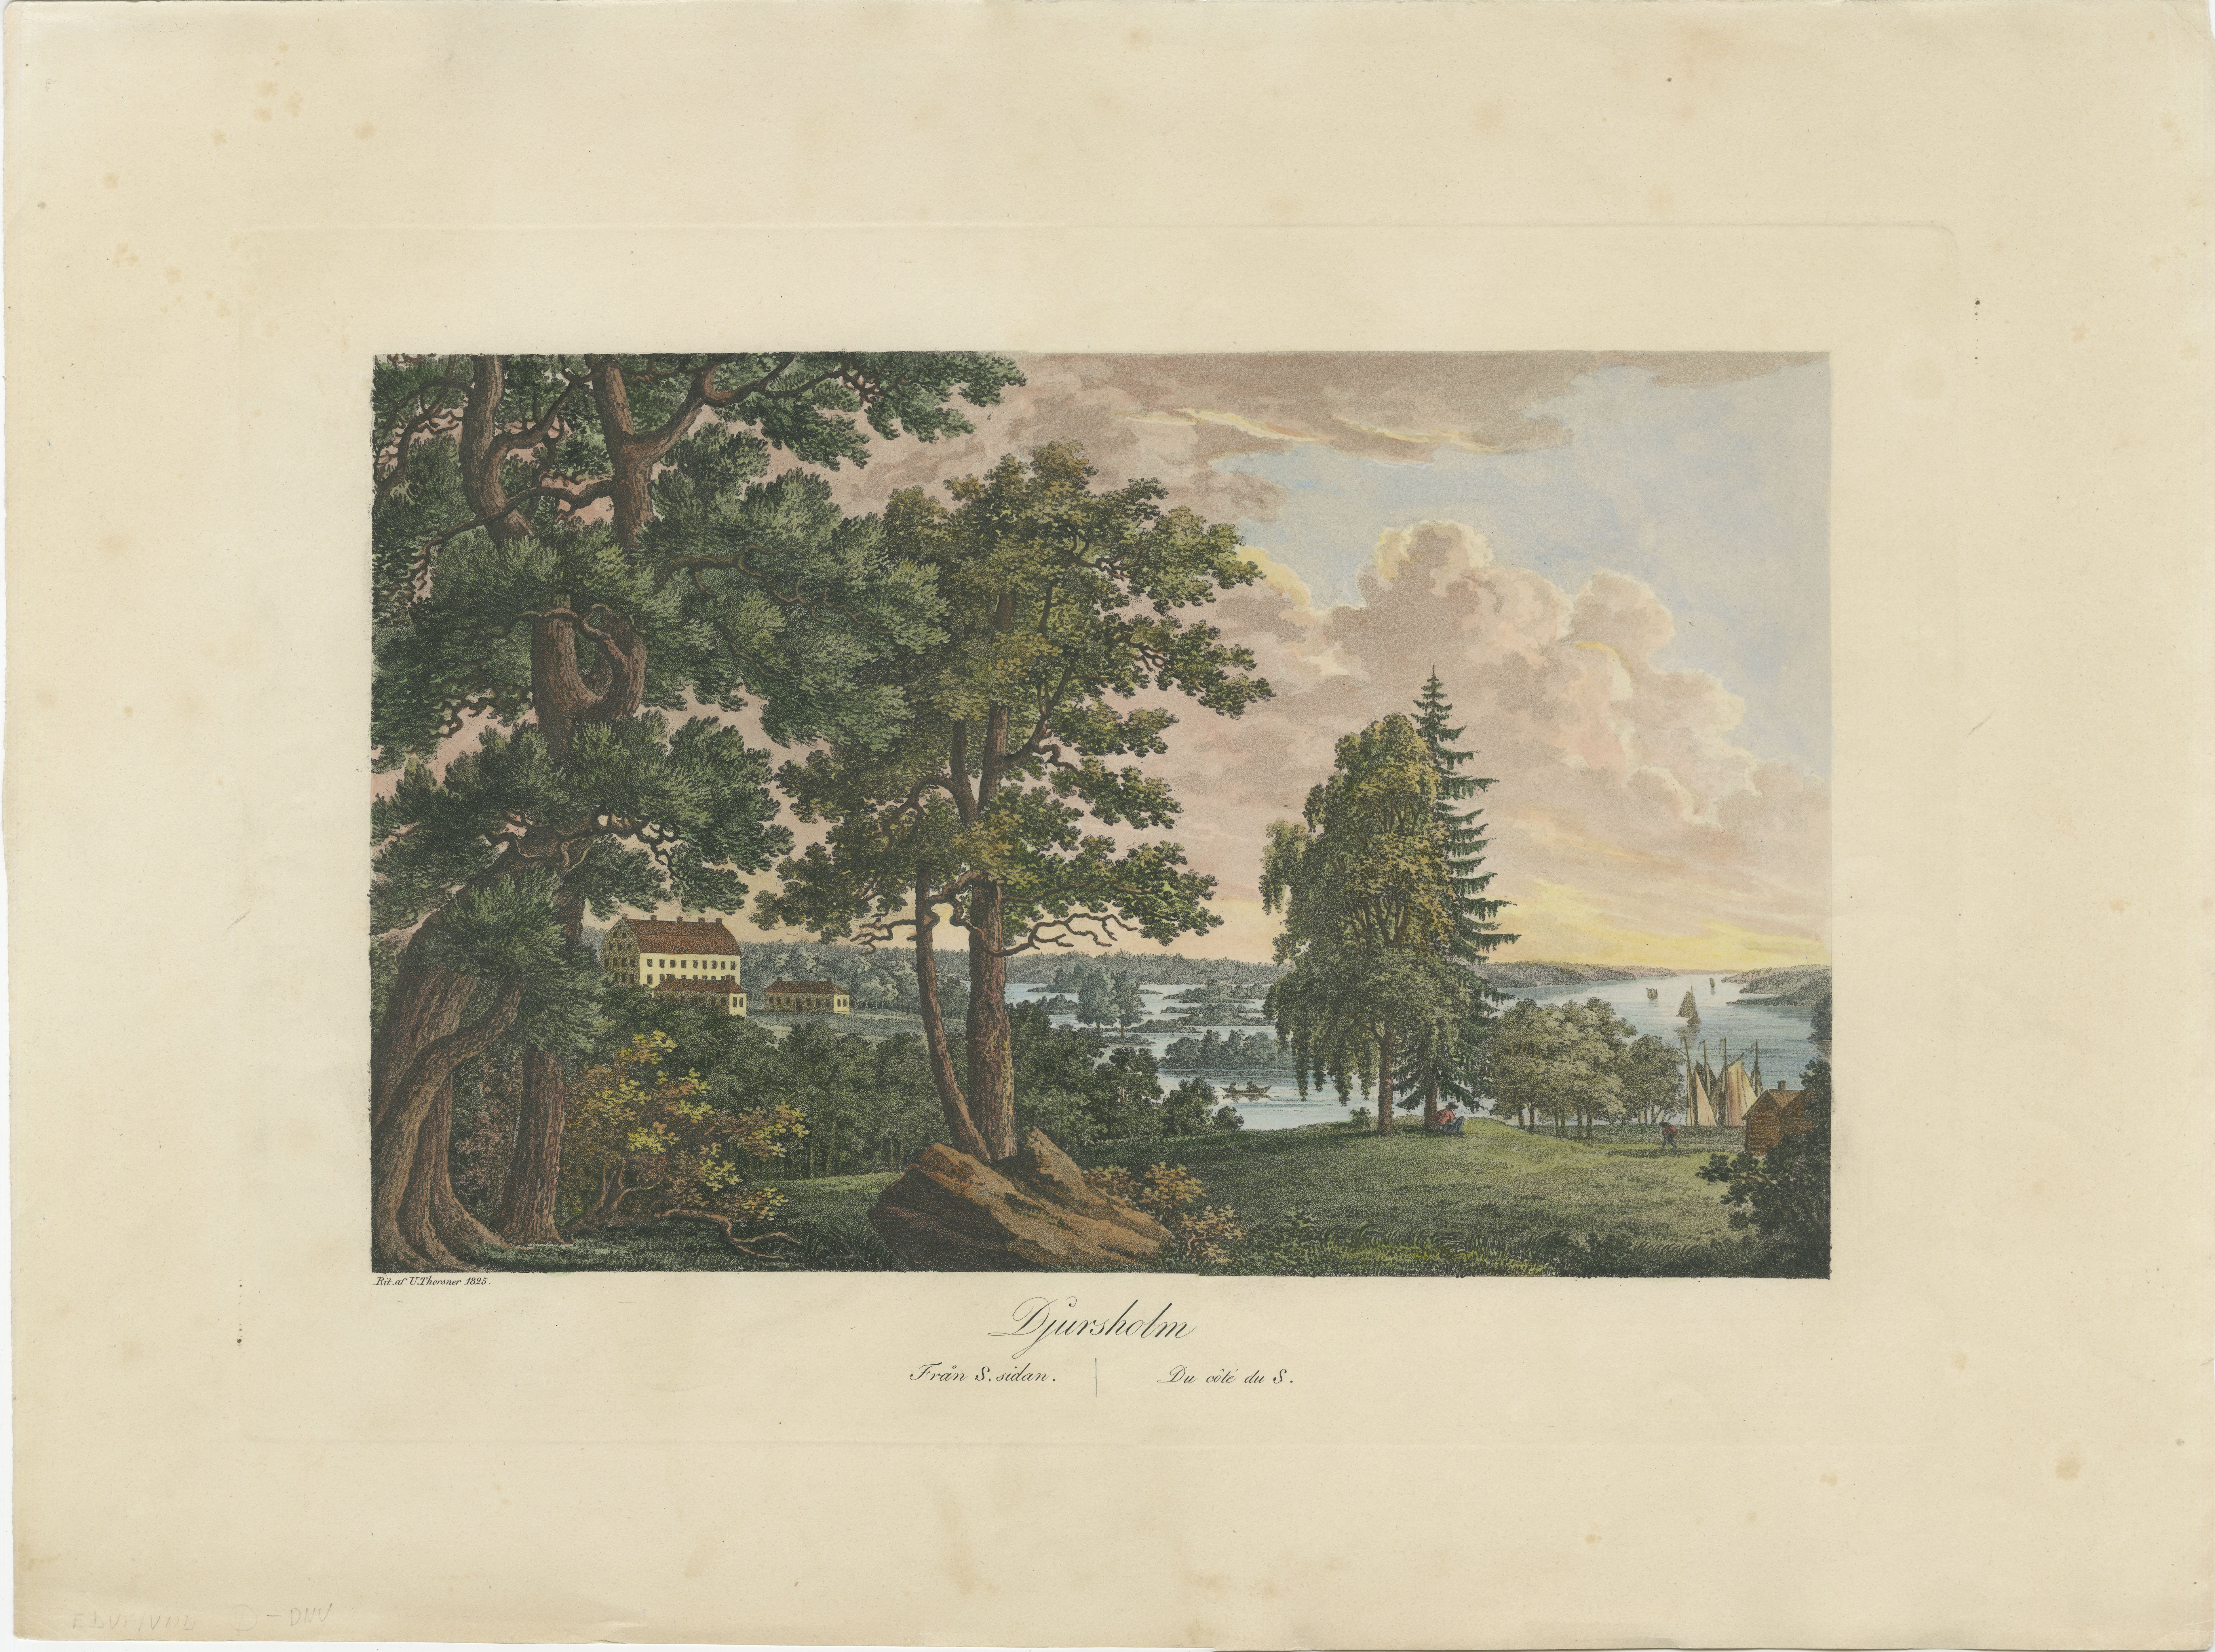 This hand-colored aquatint  is a topographical view of Djursholm Castle in Danderyd, Sweden, and it is a part of Ulrik Thersner's ambitious project, 